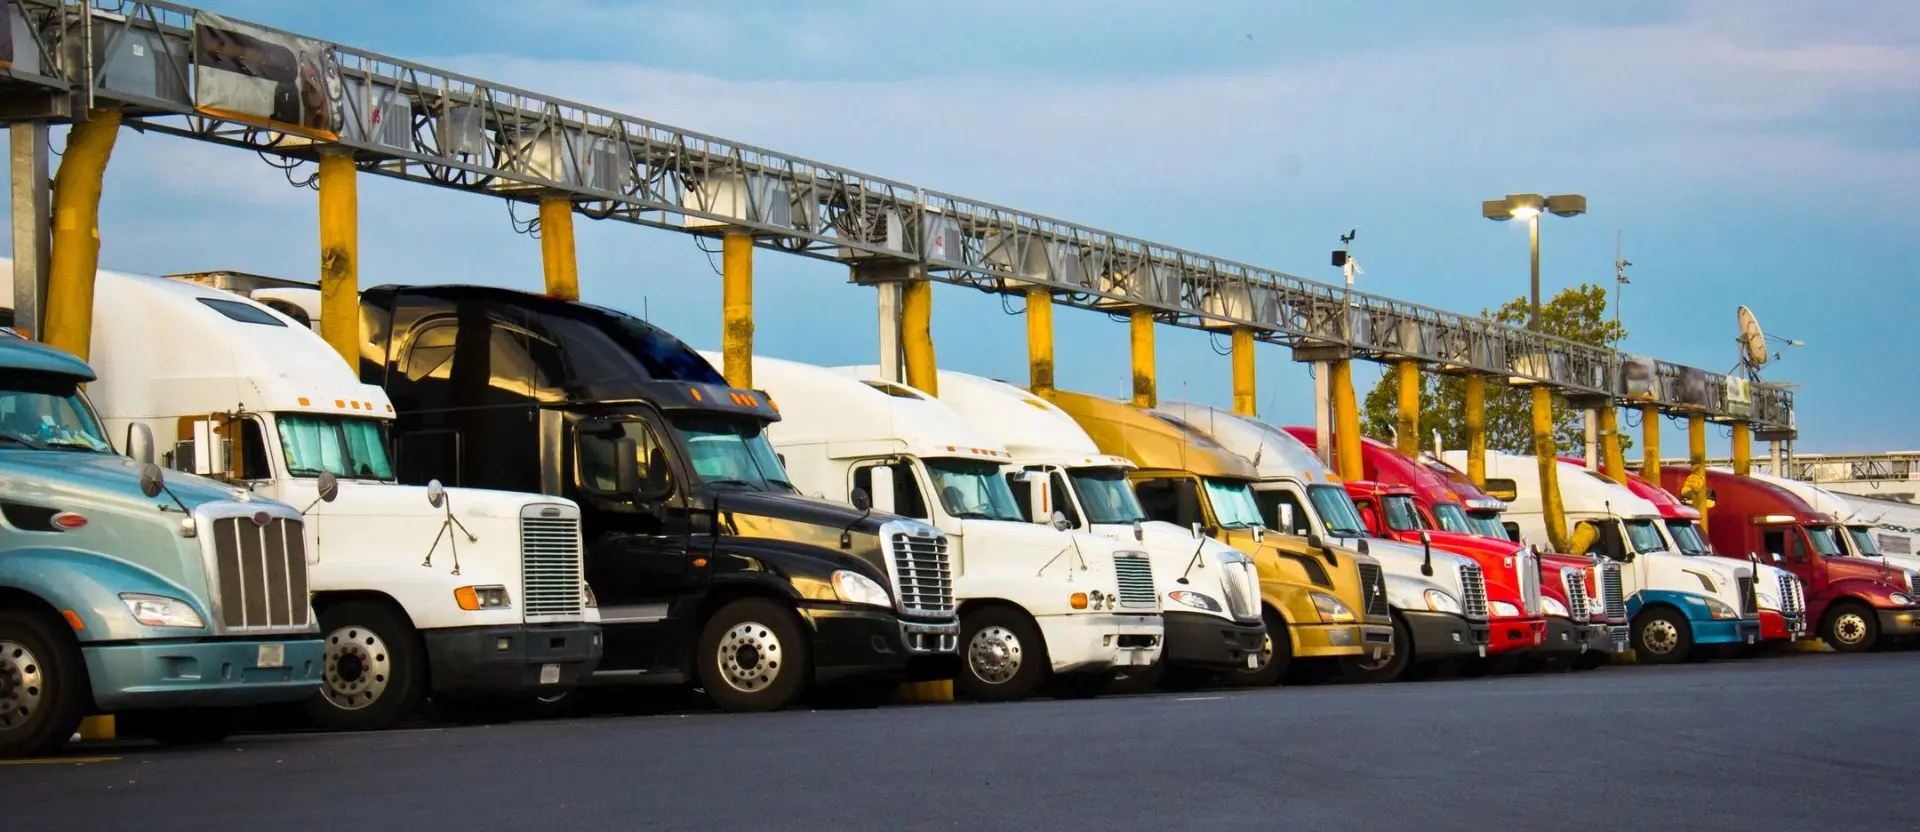 A line of trucks parked in front of a yellow bridge.